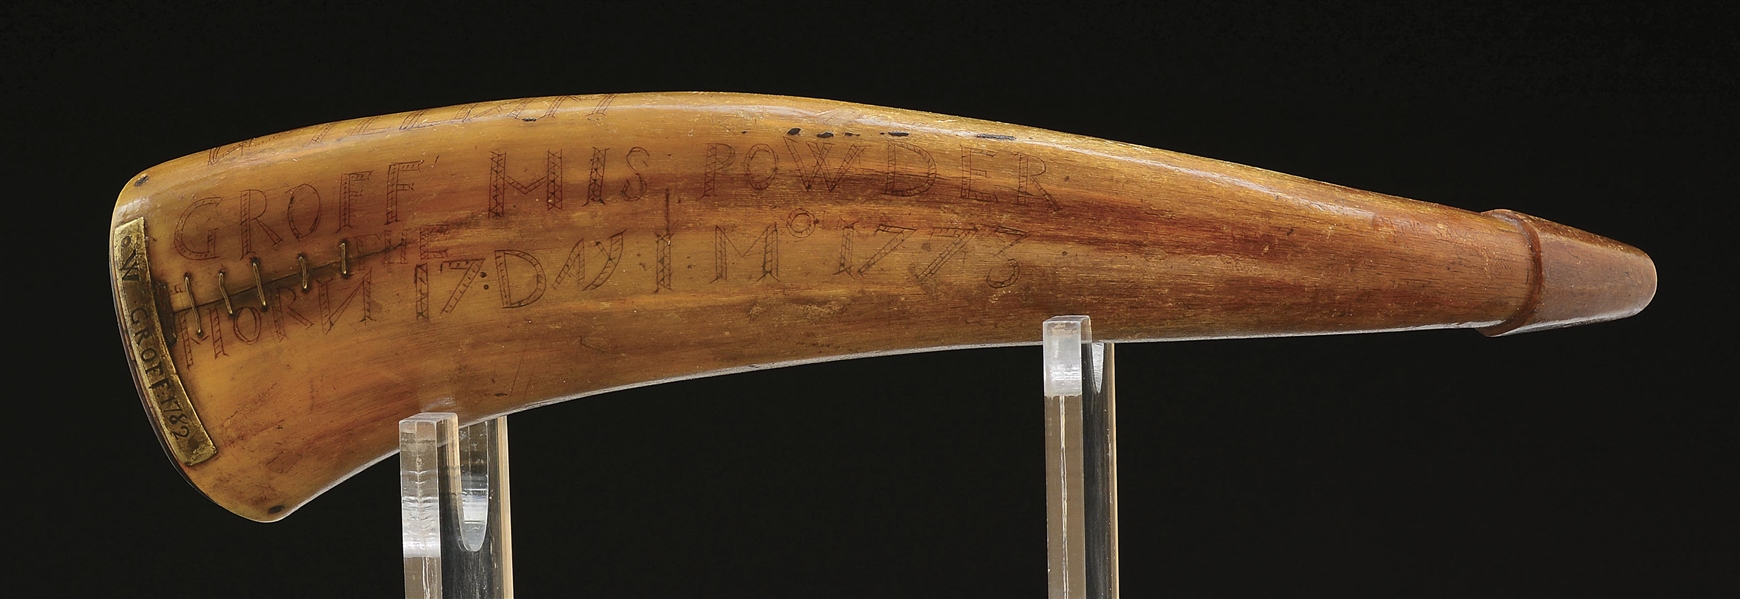 ENGRAVED LANCASTER COUNTY POWDER HORN OF WILLIAM GROFF, DATED 1773.